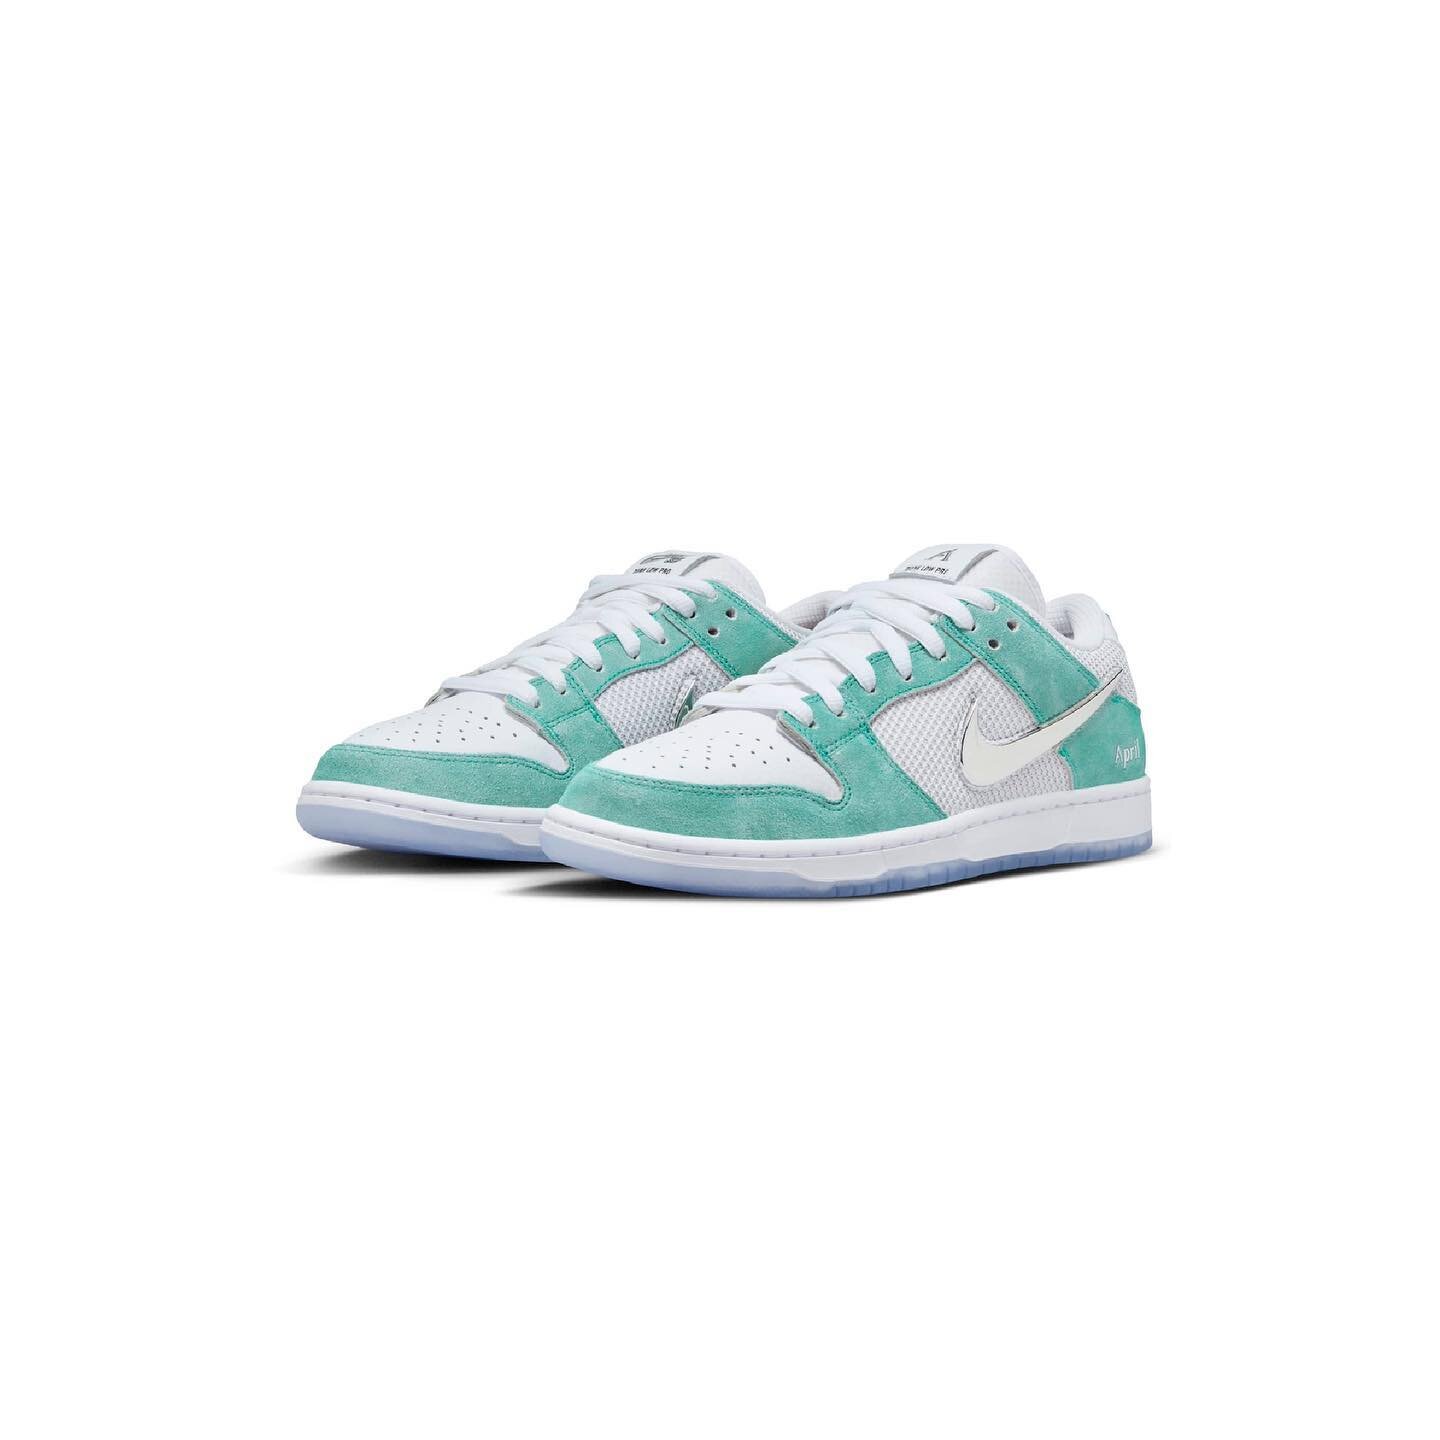 Australia&rsquo;s April Skateboards teams up with Nike SB to release their first sneaker collaboration this month.

The signature Dunk Low comes in a cool mint green with metallic silver accents, icy white midsole, translucent outsole featuring the b